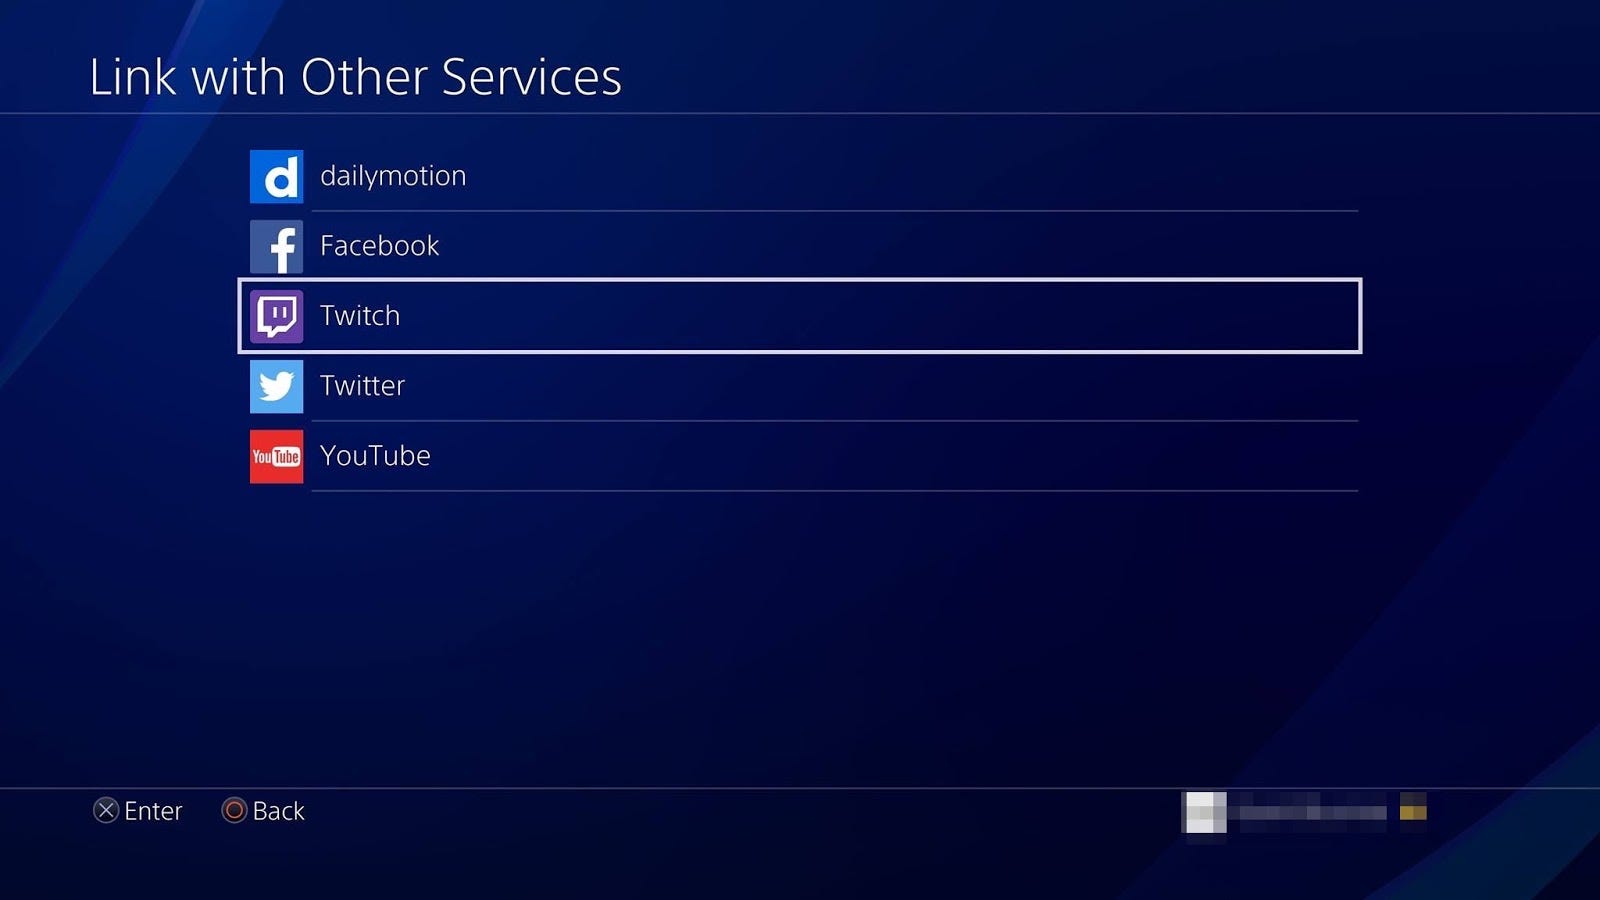 twitch to ps4 via extremetech - how to connect ps4 fortnite to twitch